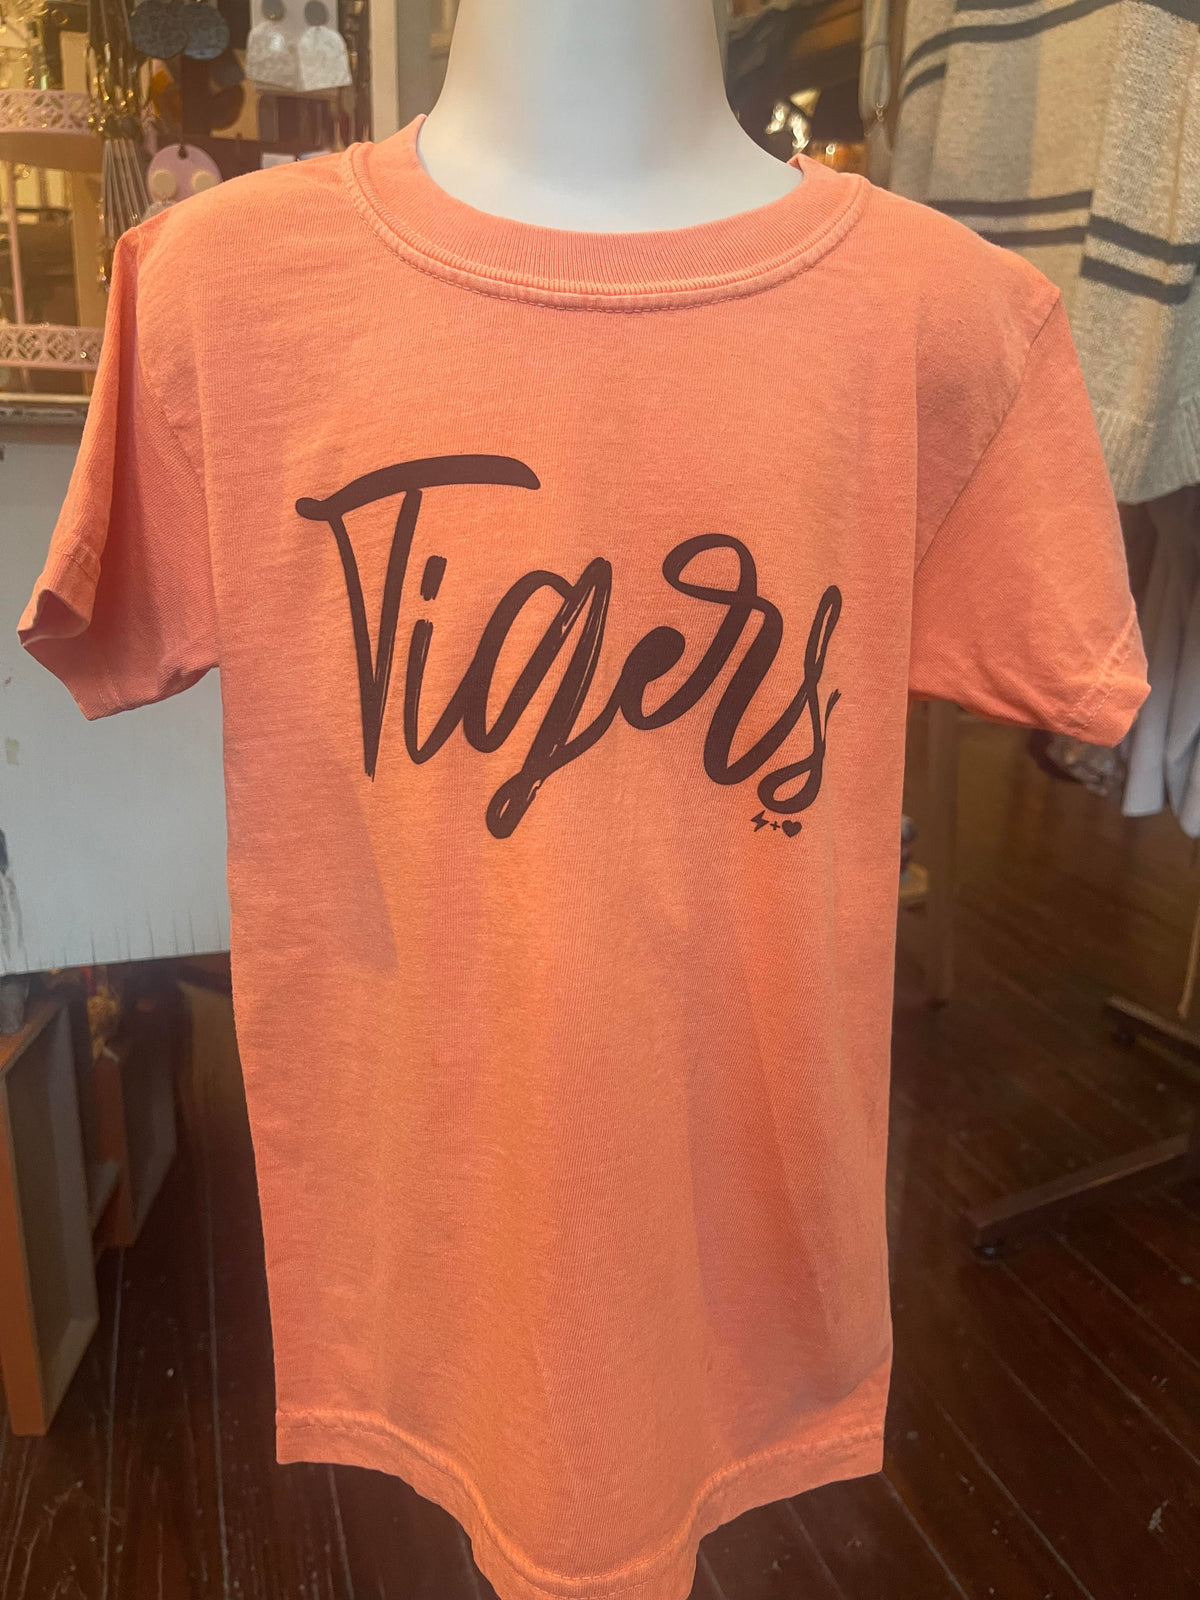 Tiger Tee - Youth